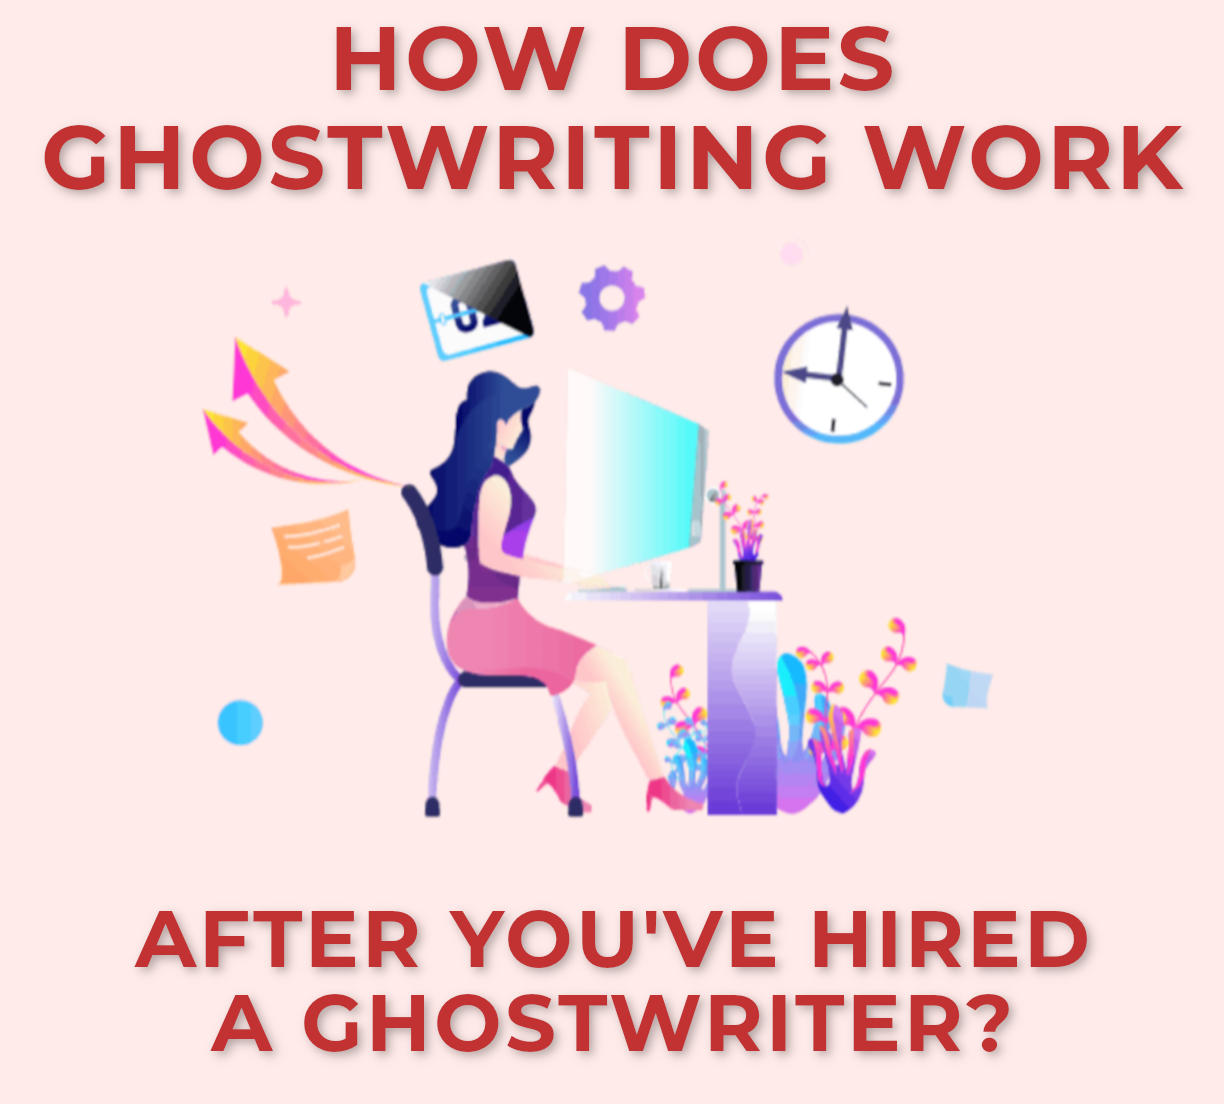 How Does Ghostwriting Work After Youve Hired A Ghostwriter Blog Header